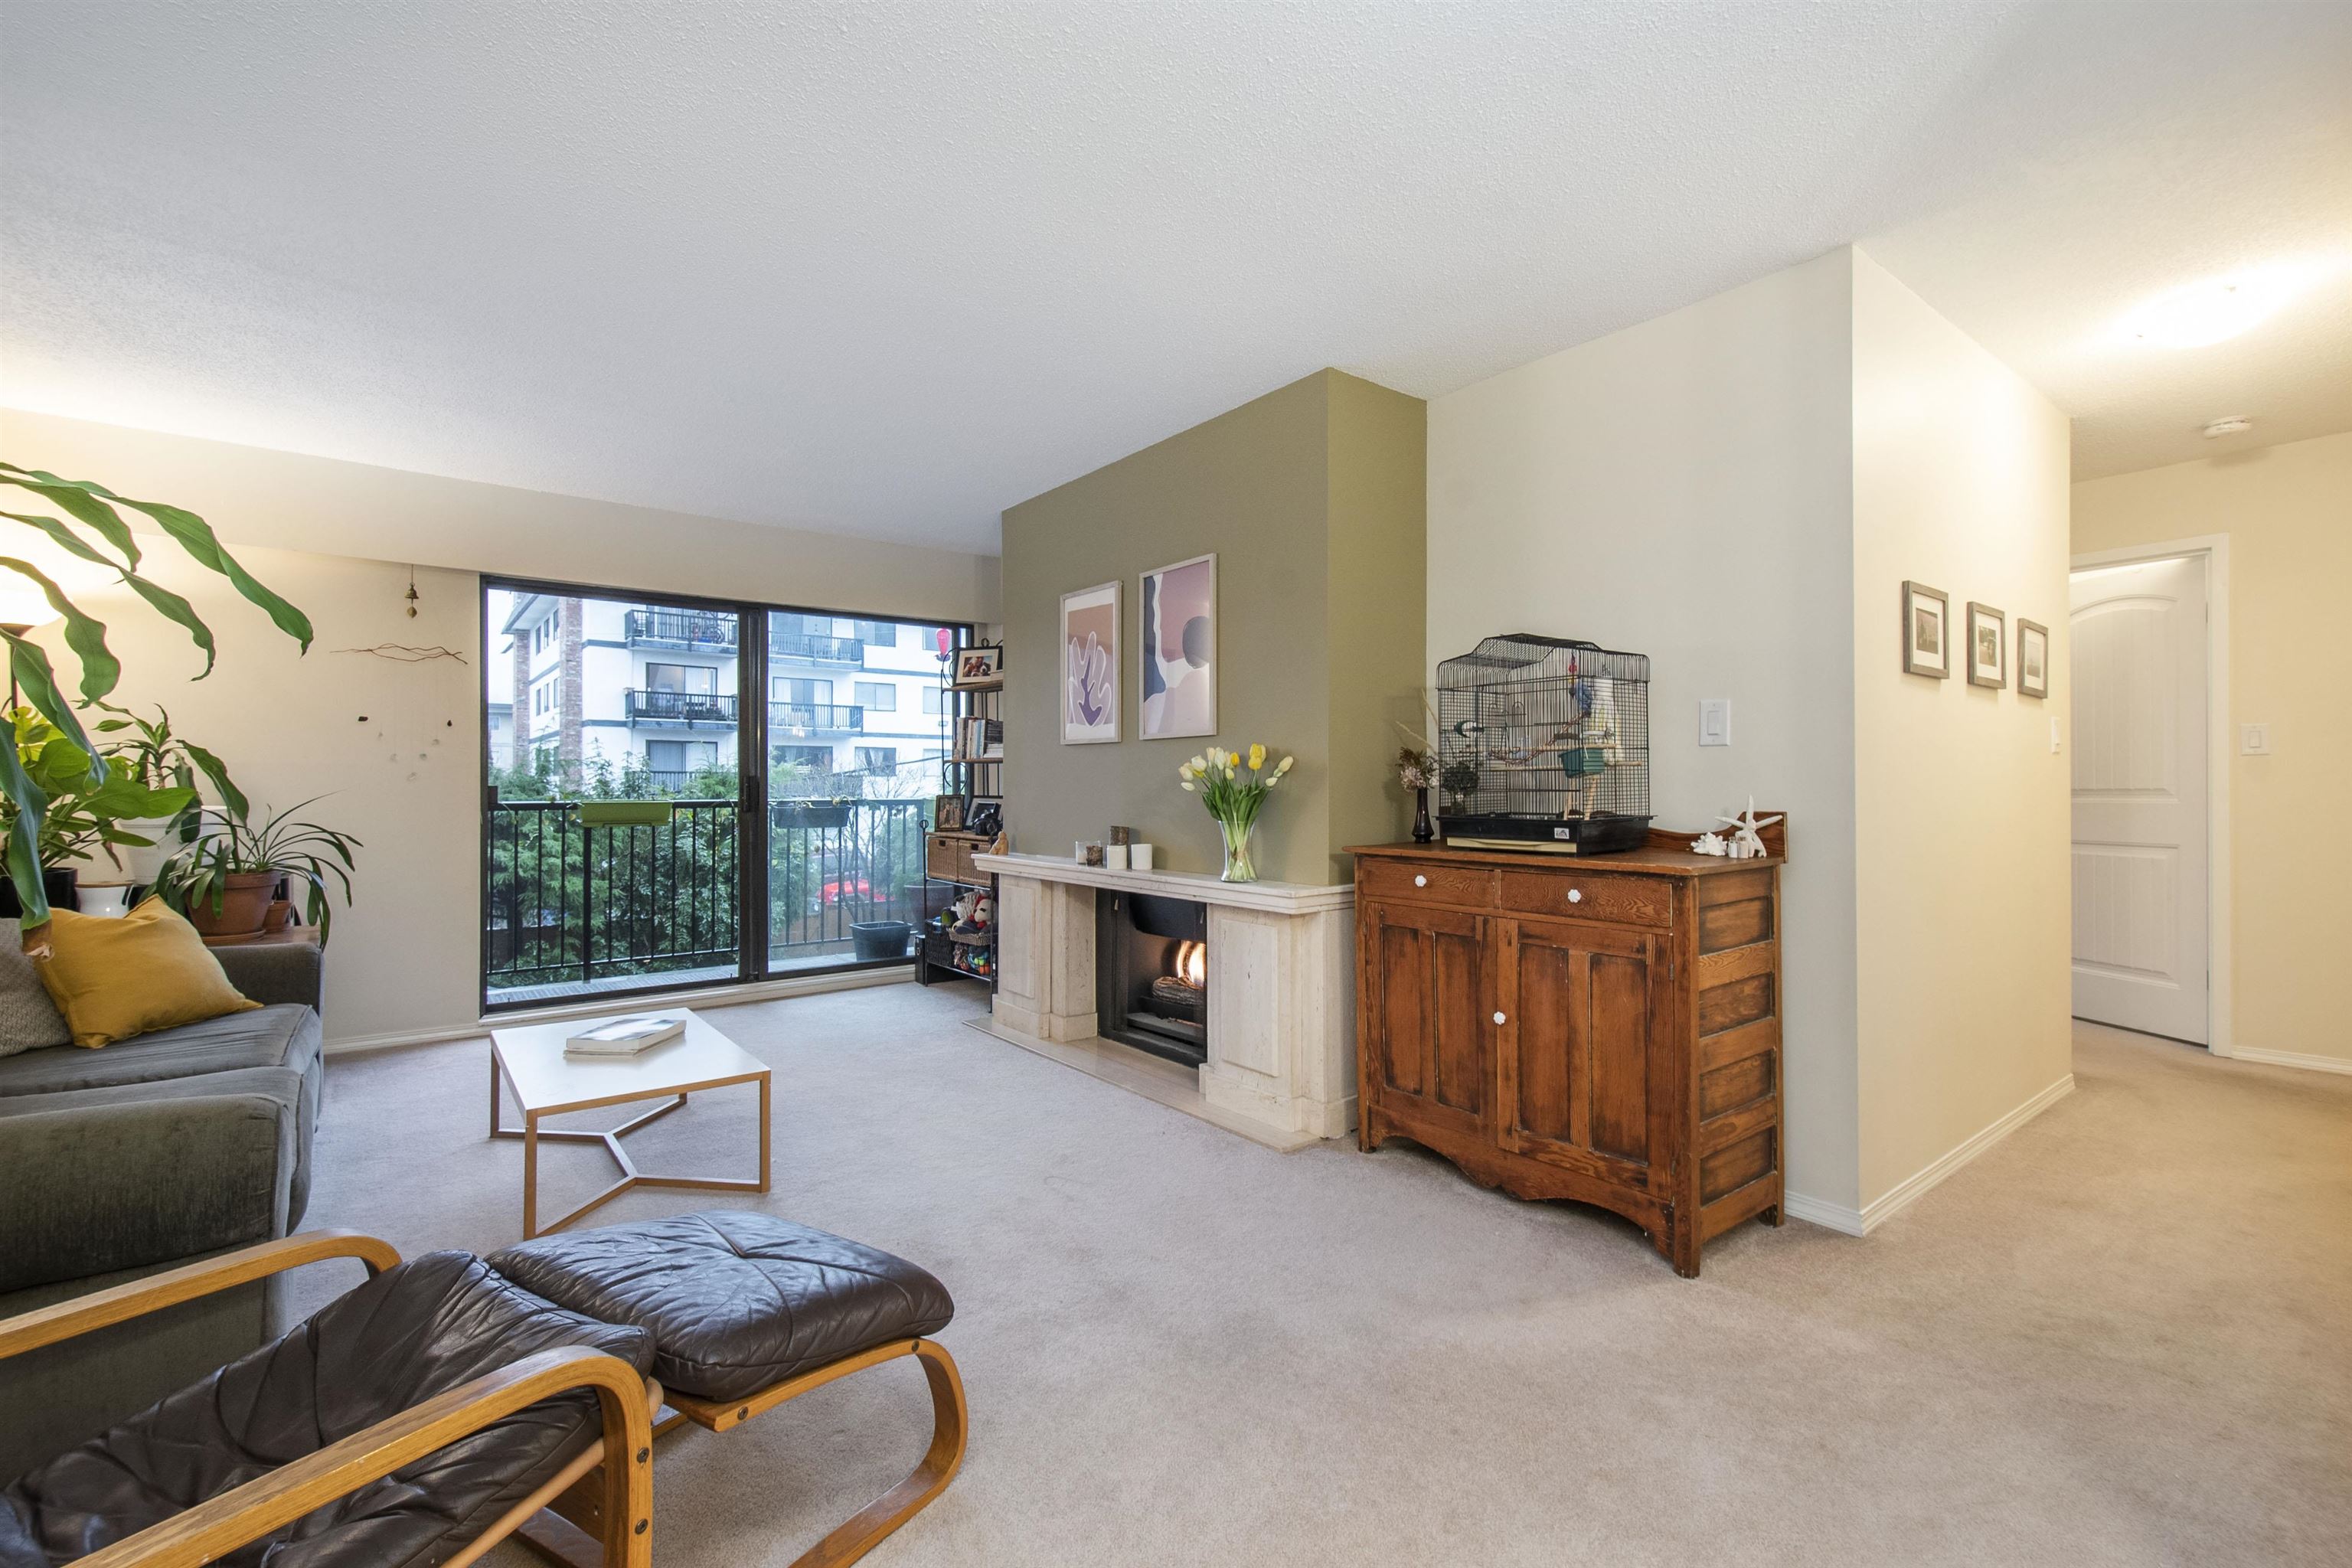 Central Lonsdale Apartment/Condo for sale:  2 bedroom 1,003 sq.ft. (Listed 6400-04-29)